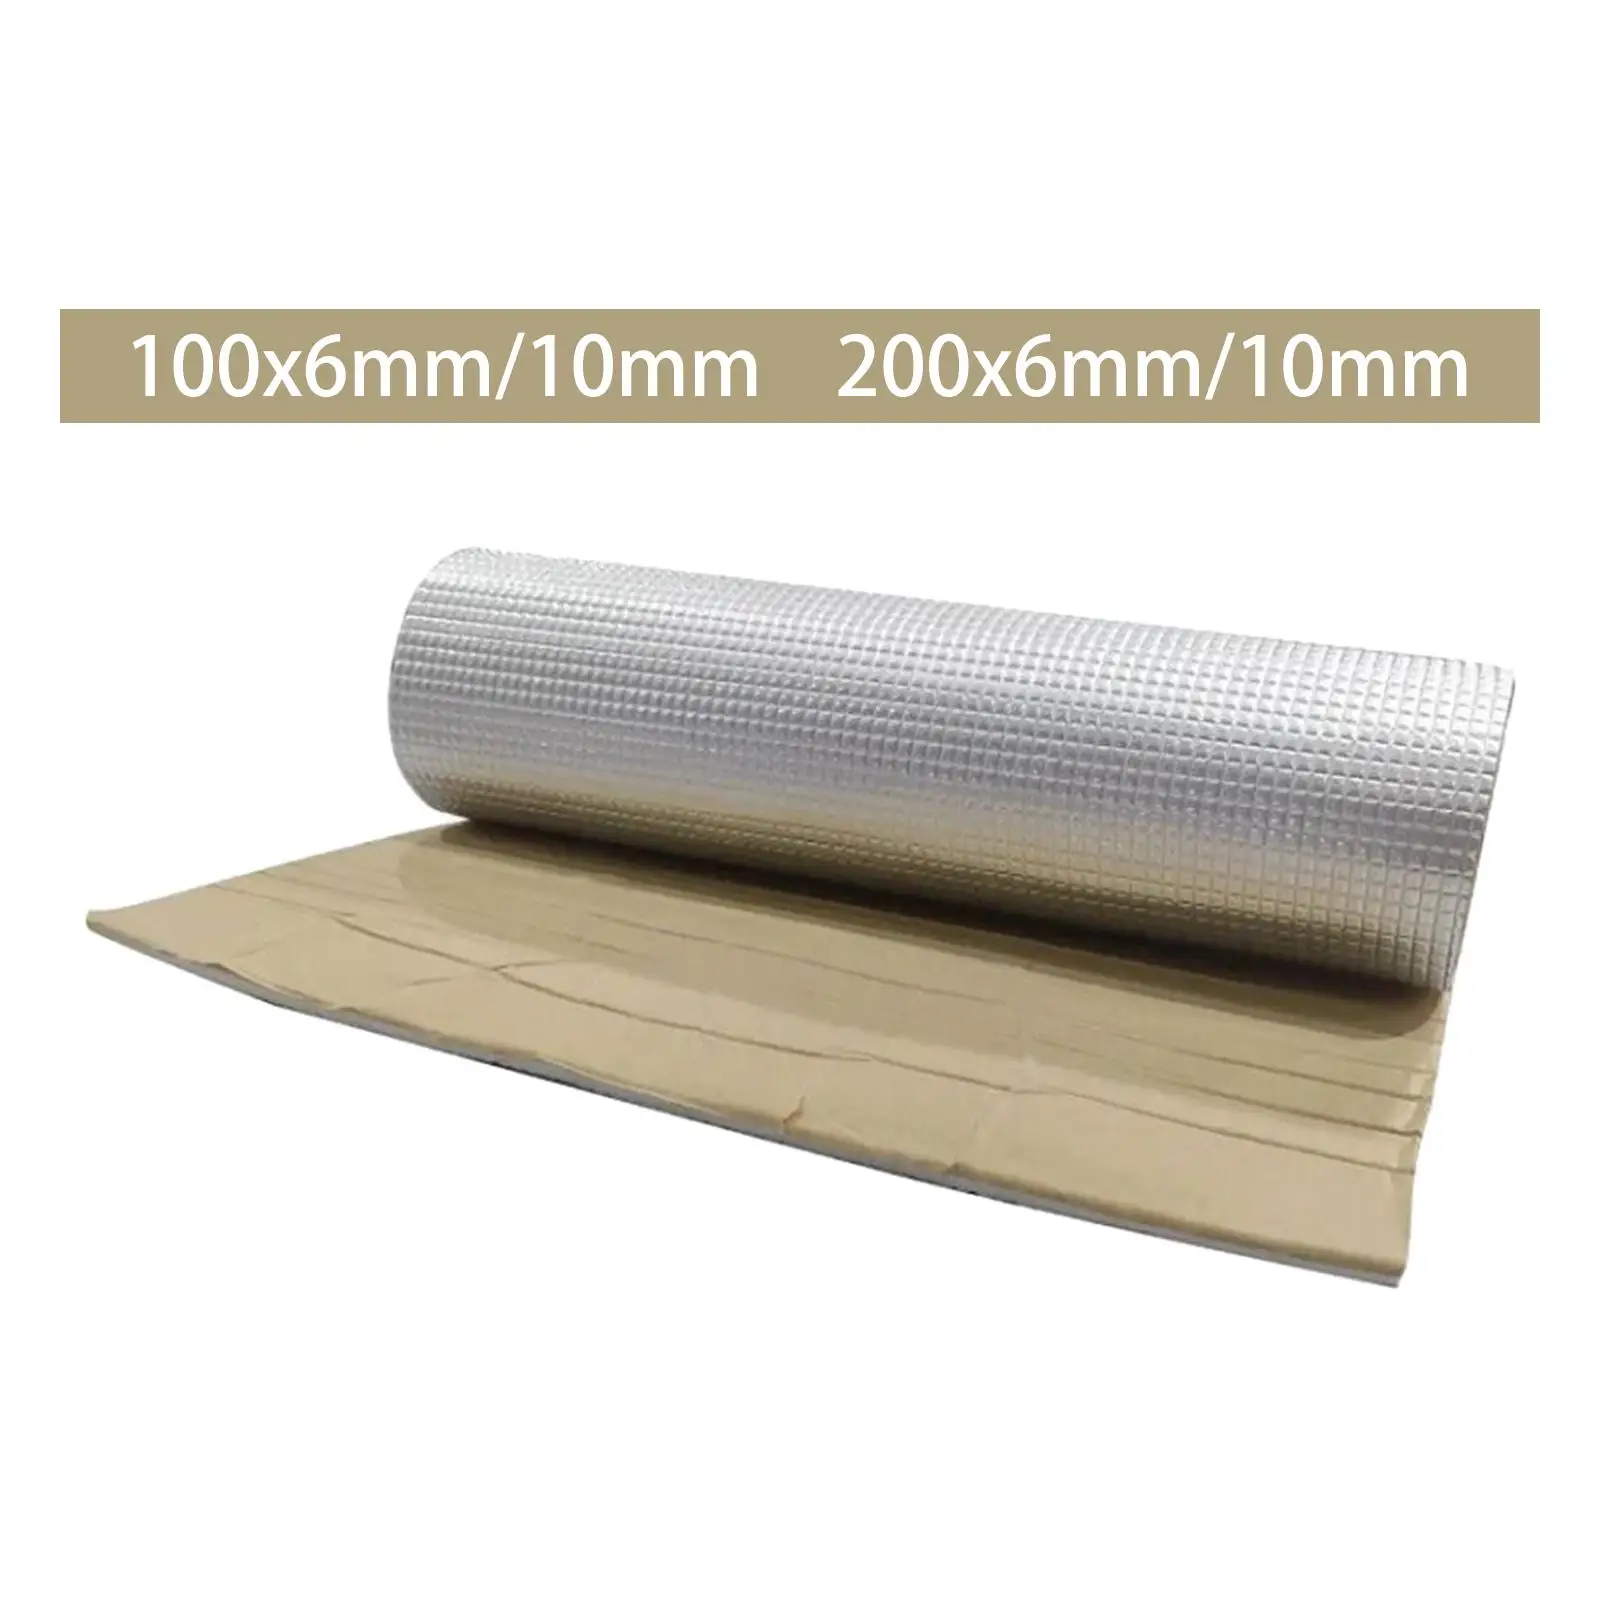 Audio Noise Insulation and Dampening Thermal Insulation Properties Car Noise Sound Deadener Sound Deadener Insulation Mat